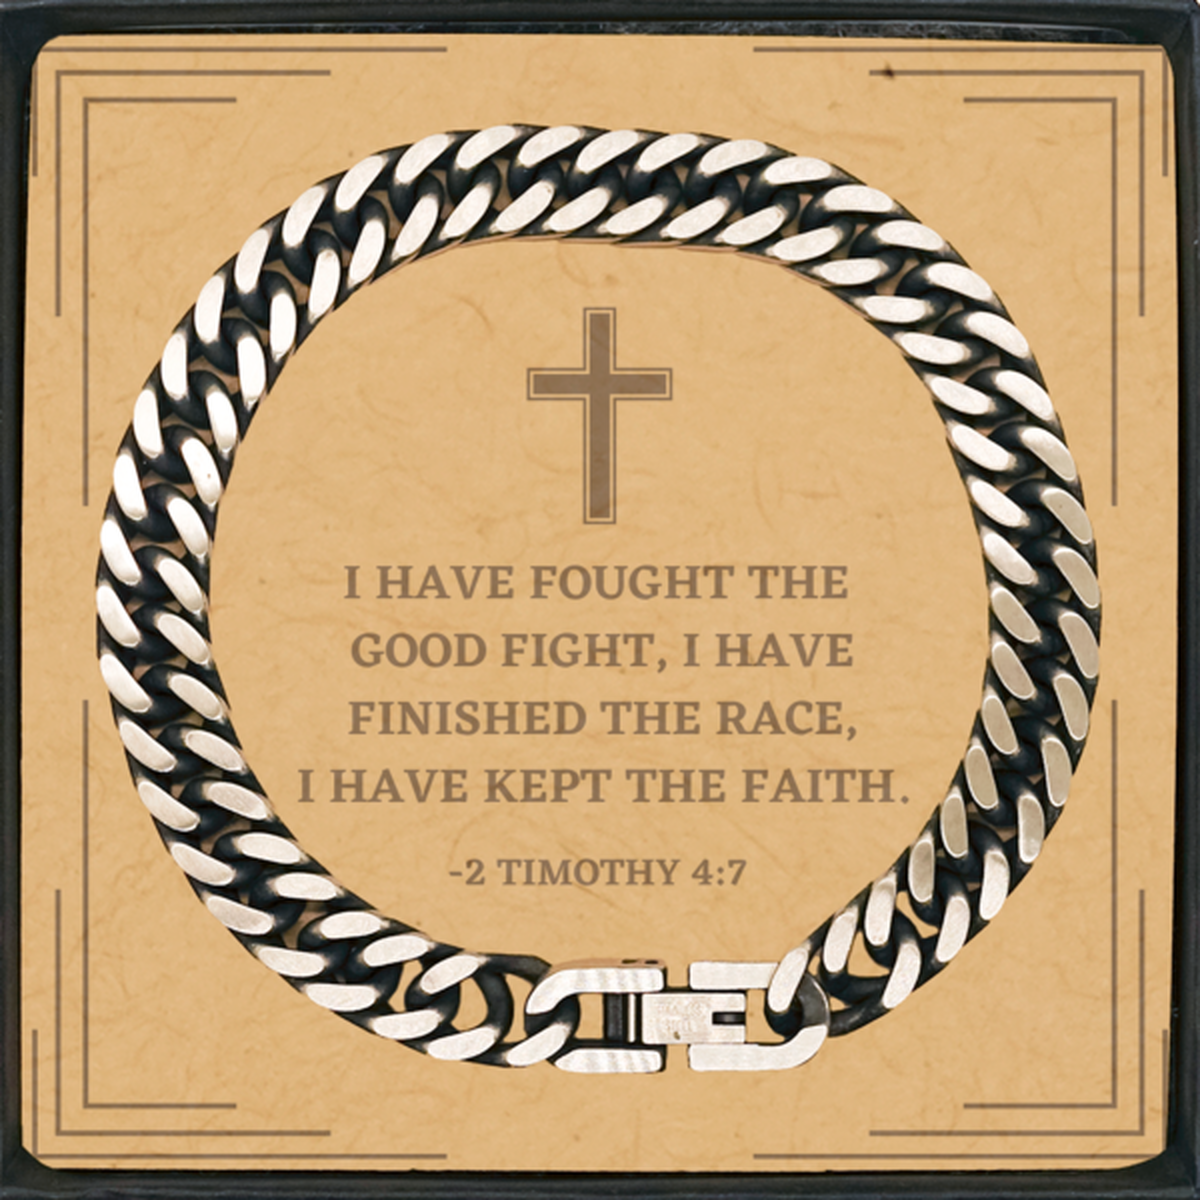 Baptism Gifts For Teenage Boys Girls, Christian Bible Verse Cuban Link Chain Bracelet, I have fought the good fight, Confirmation Gifts, Bible Verse Card for Son, Godson, Grandson